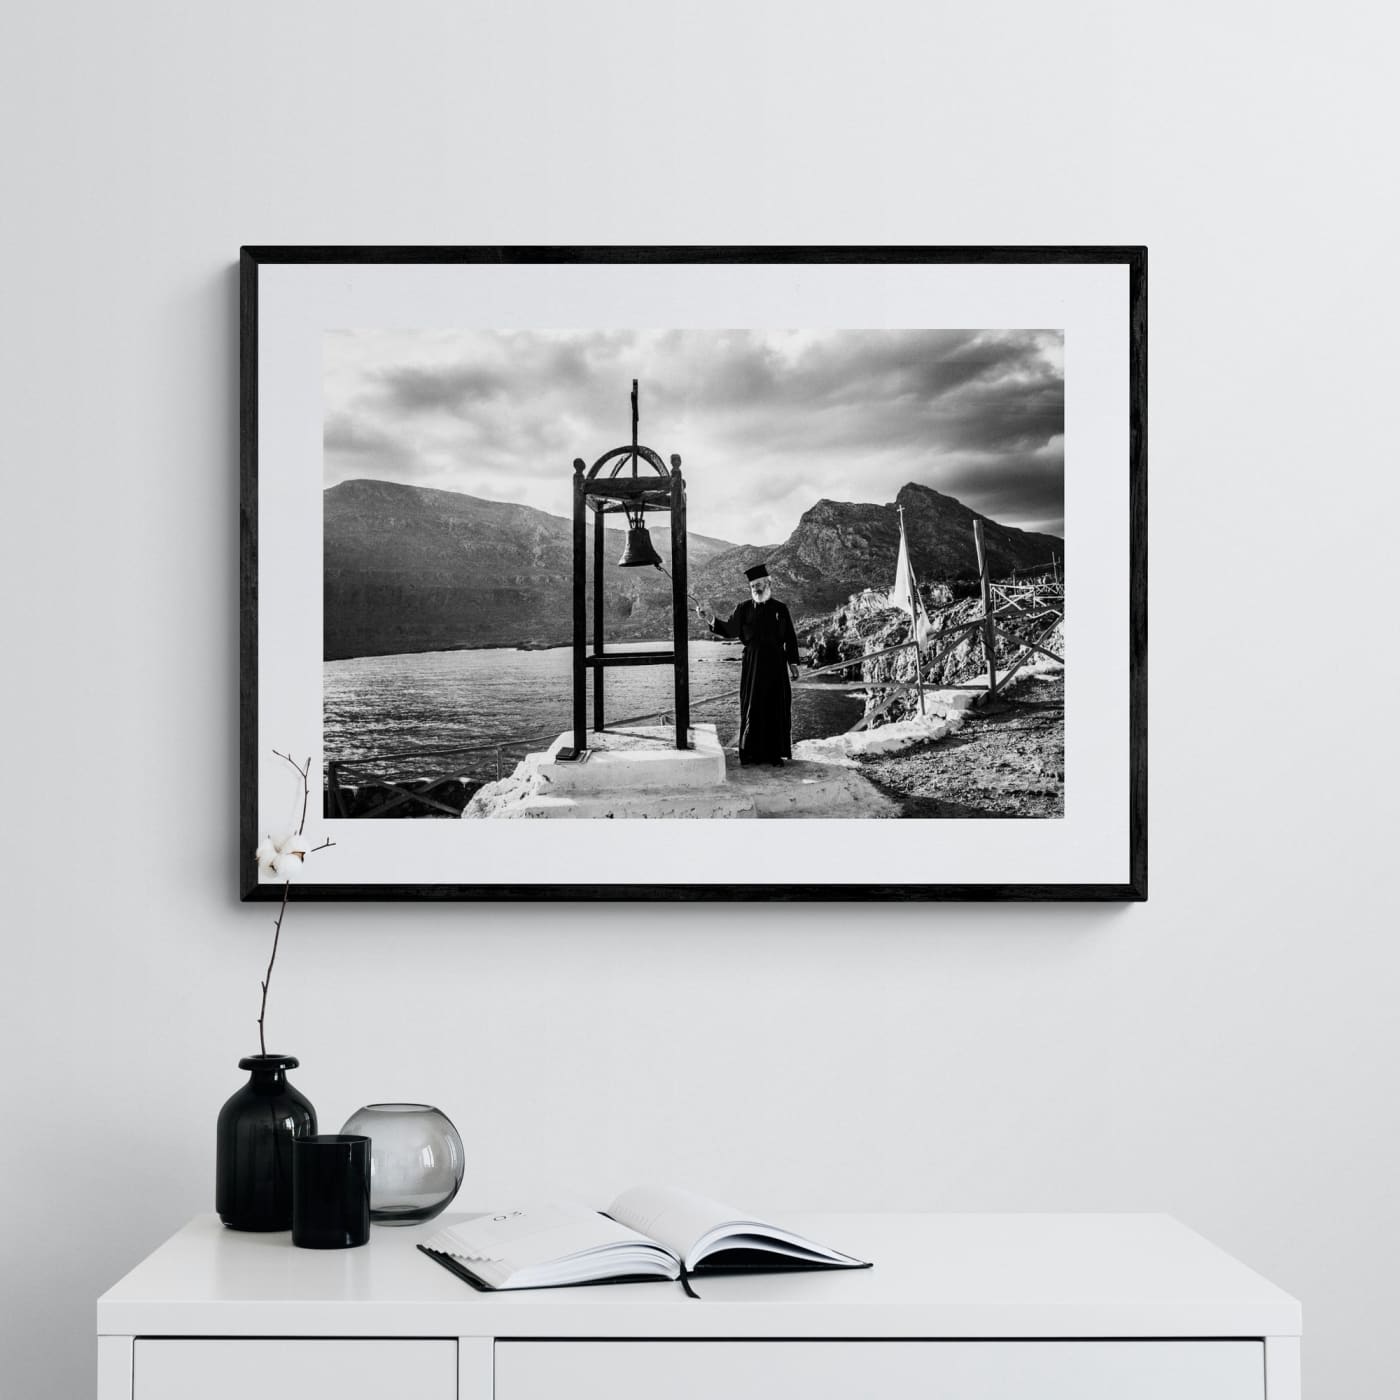 Black and White Photography Wall Art Greece | Priest striking the bell at St. John celebration in Vrykounta Olympos Karpathos Dodecanese by George Tatakis - single framed photo